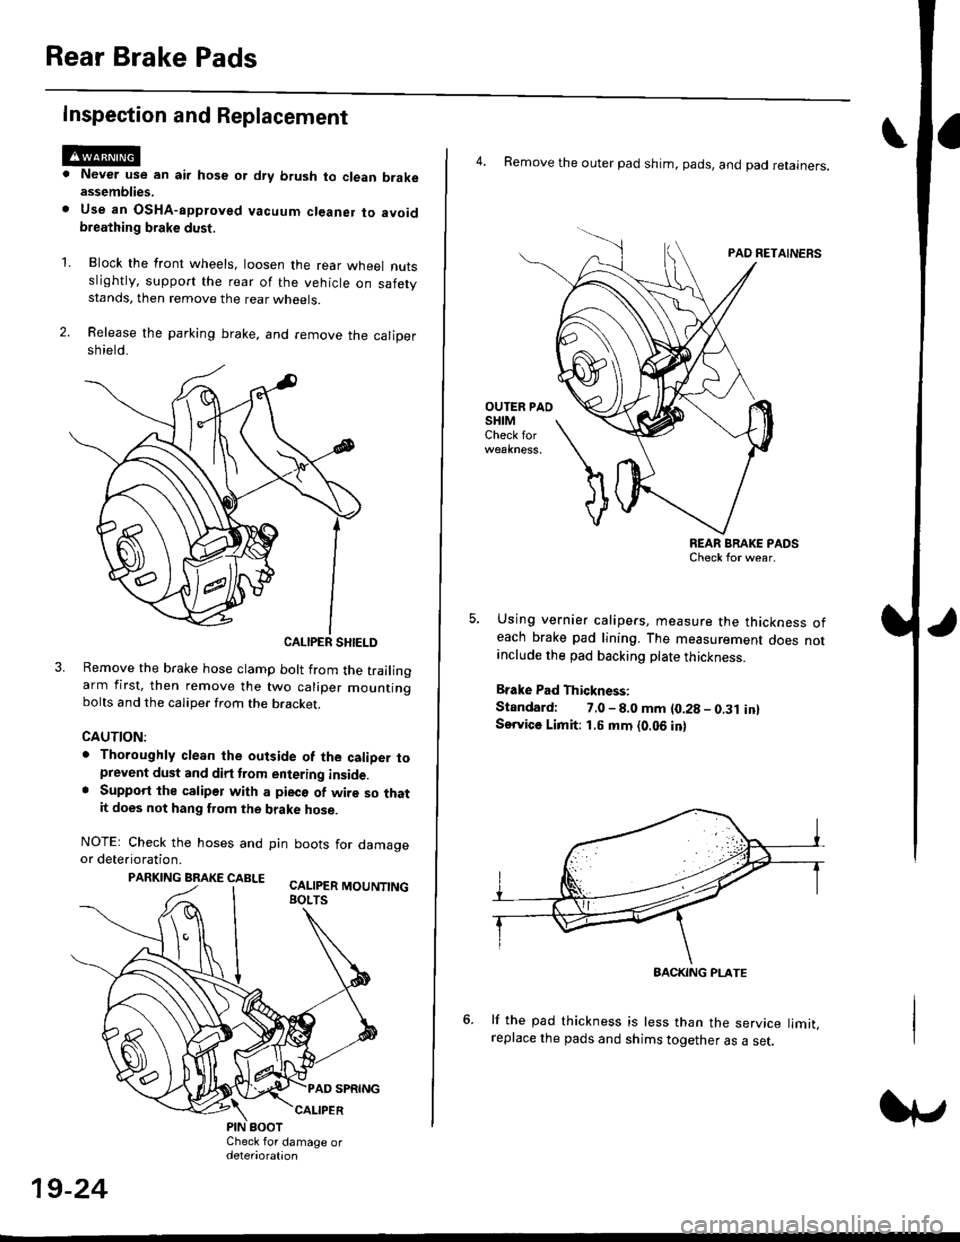 HONDA CIVIC 1996 6.G Service Manual Rear Brake Pads
Inspection and Replacement
Never use an air hose or dry brush to clean brakeassemblies.
Use an OsHA-apptoved vacuum cl€aner to avoidbreathing brake dust,
Block the front wheels, loos